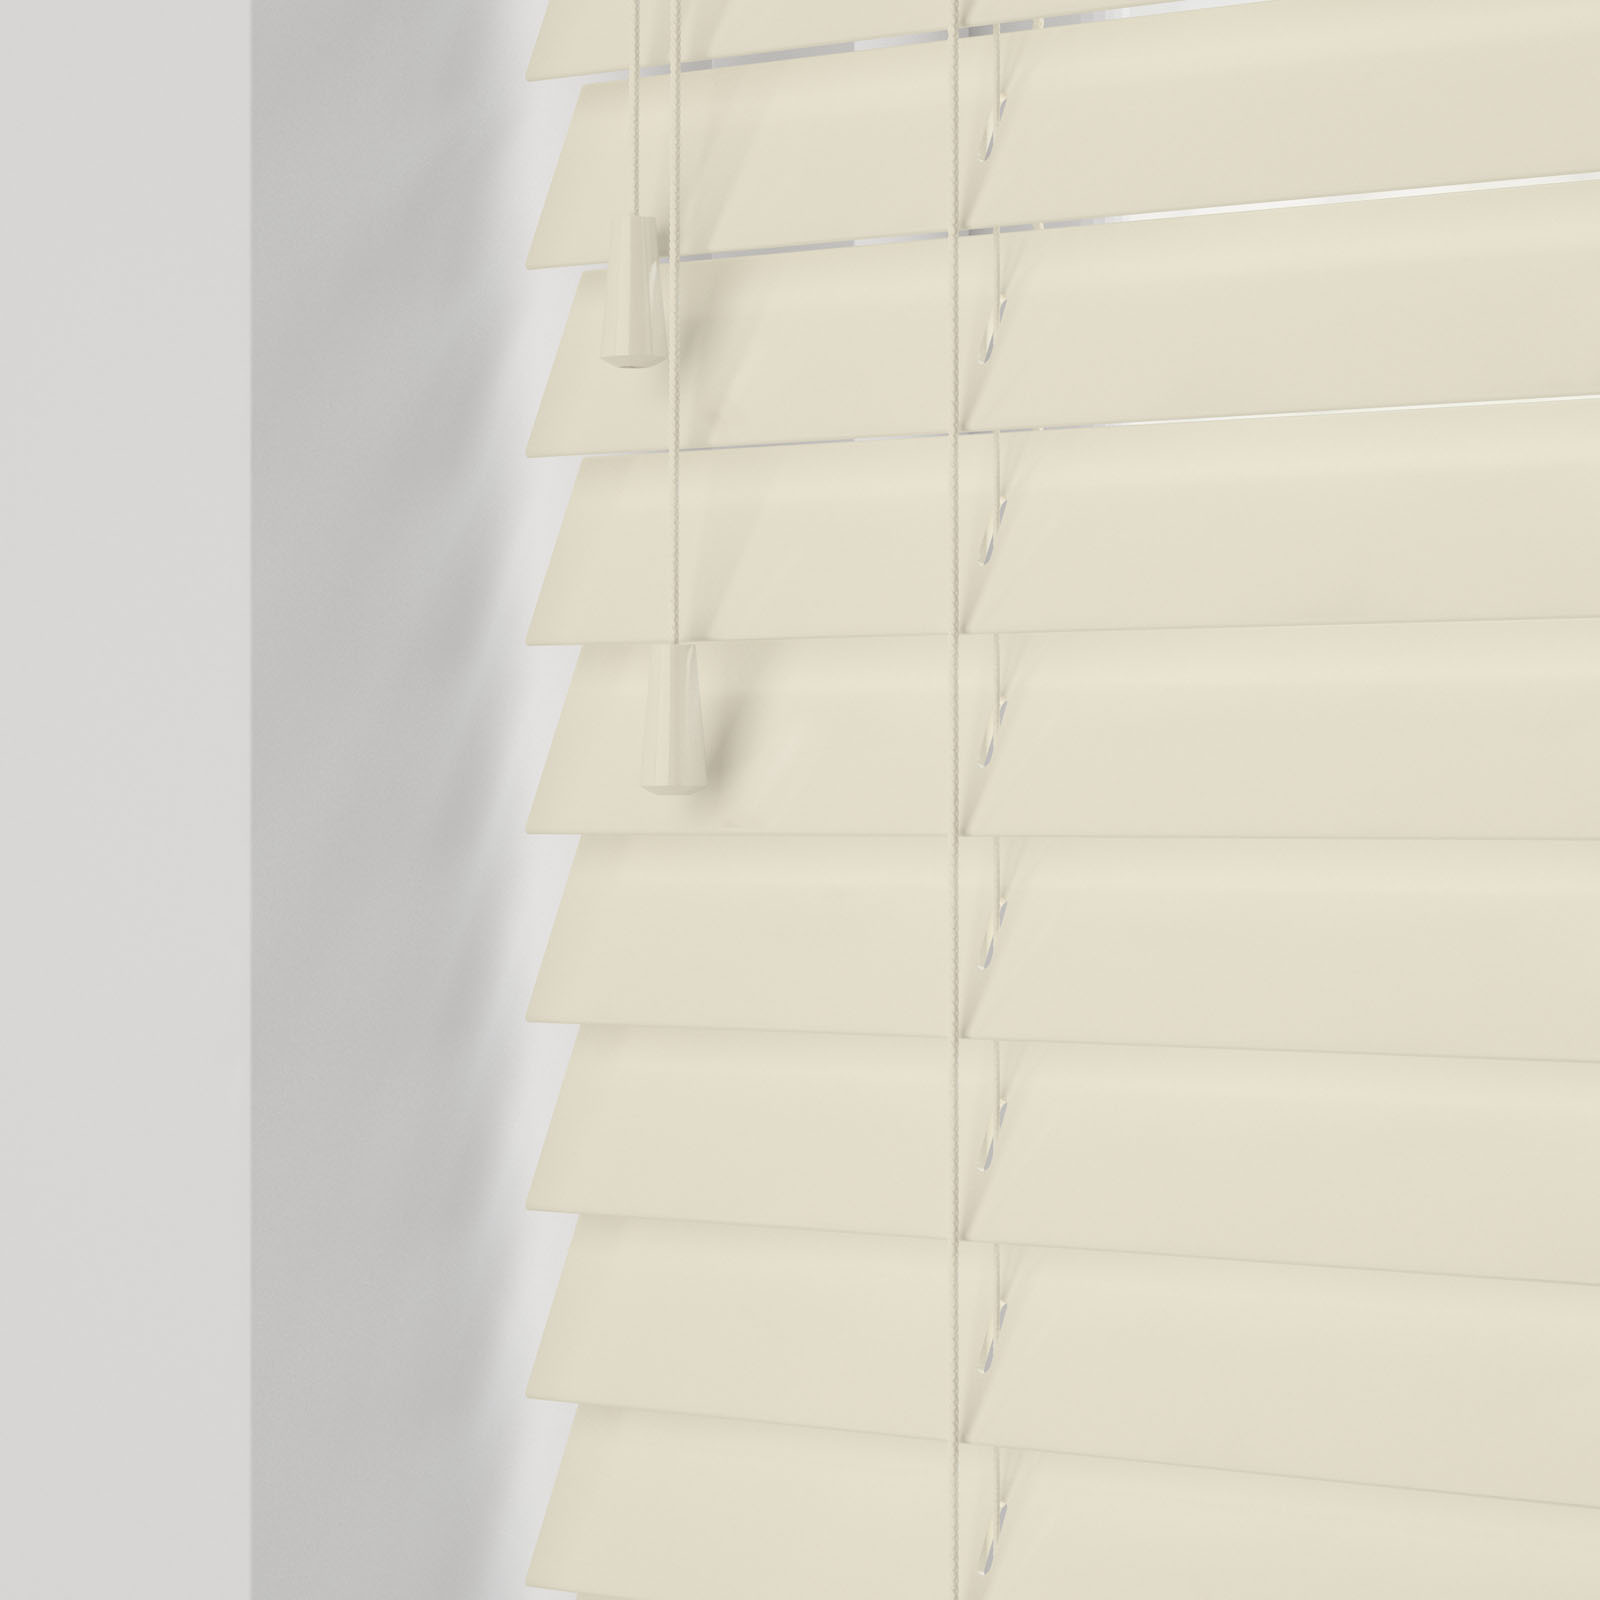 Venetian Blinds With Cord Or Tape Options Bingham